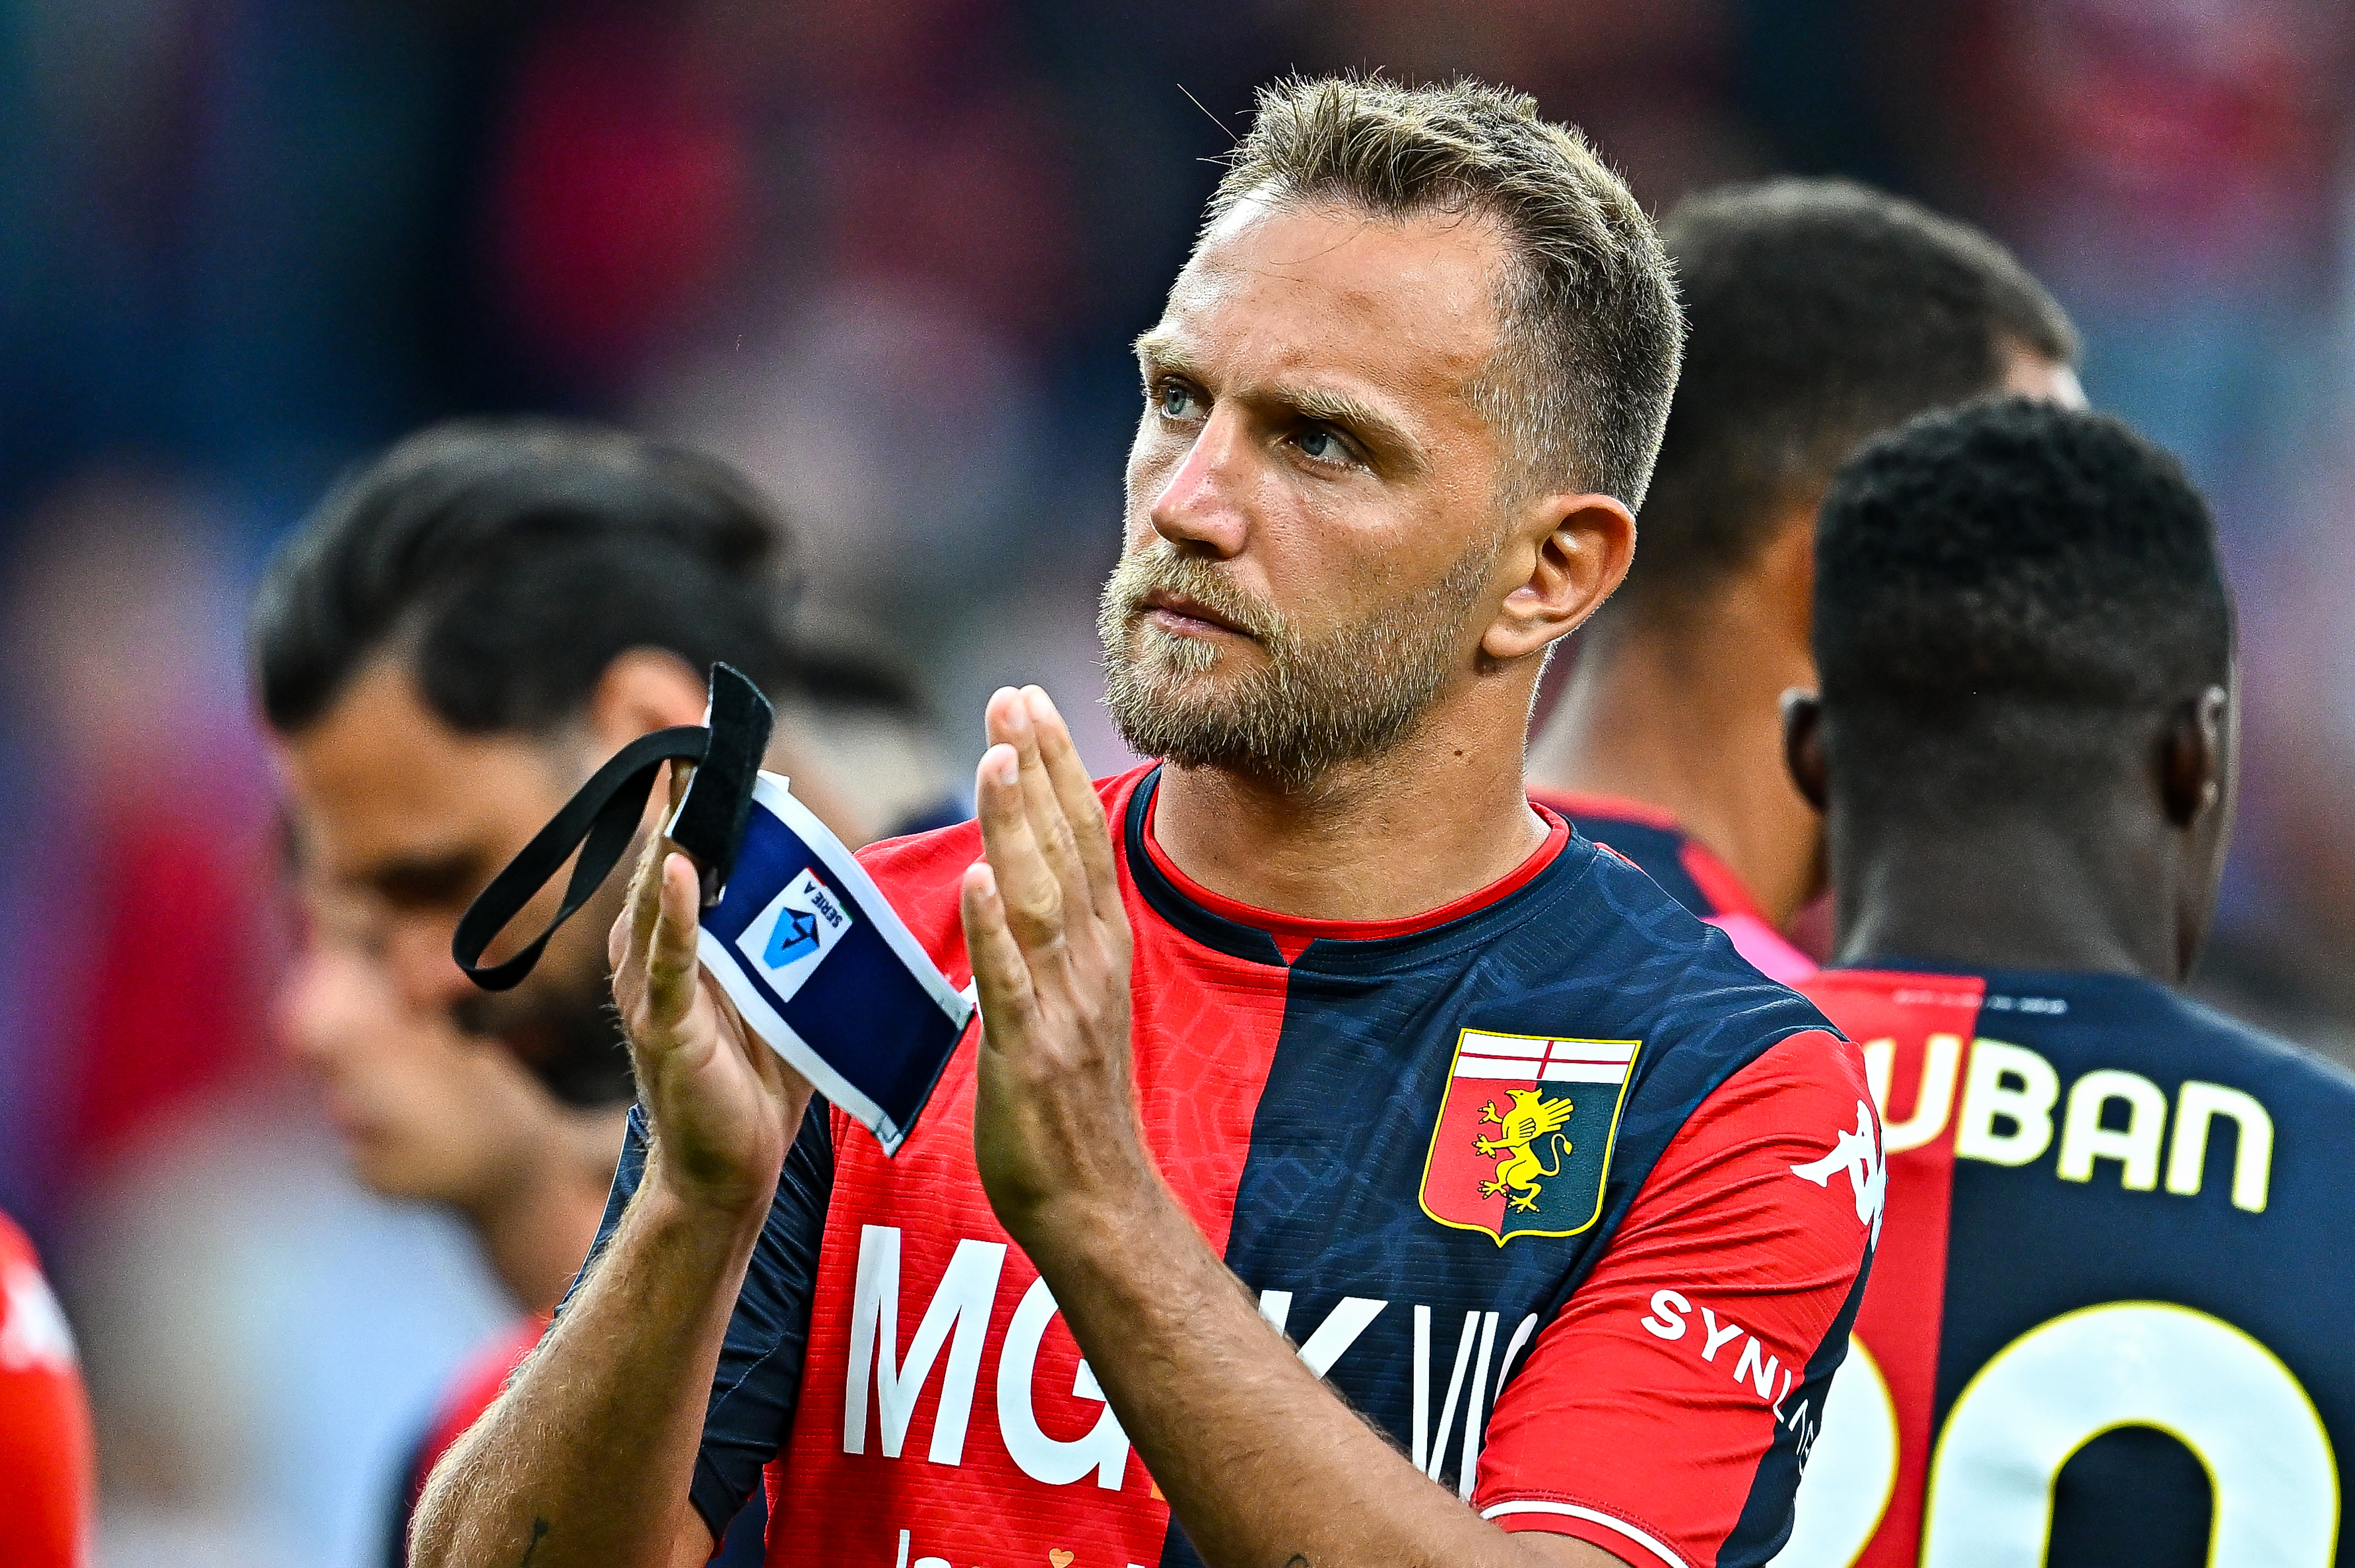 Domenico Criscito on earning €2000 a month: Genoa is my life